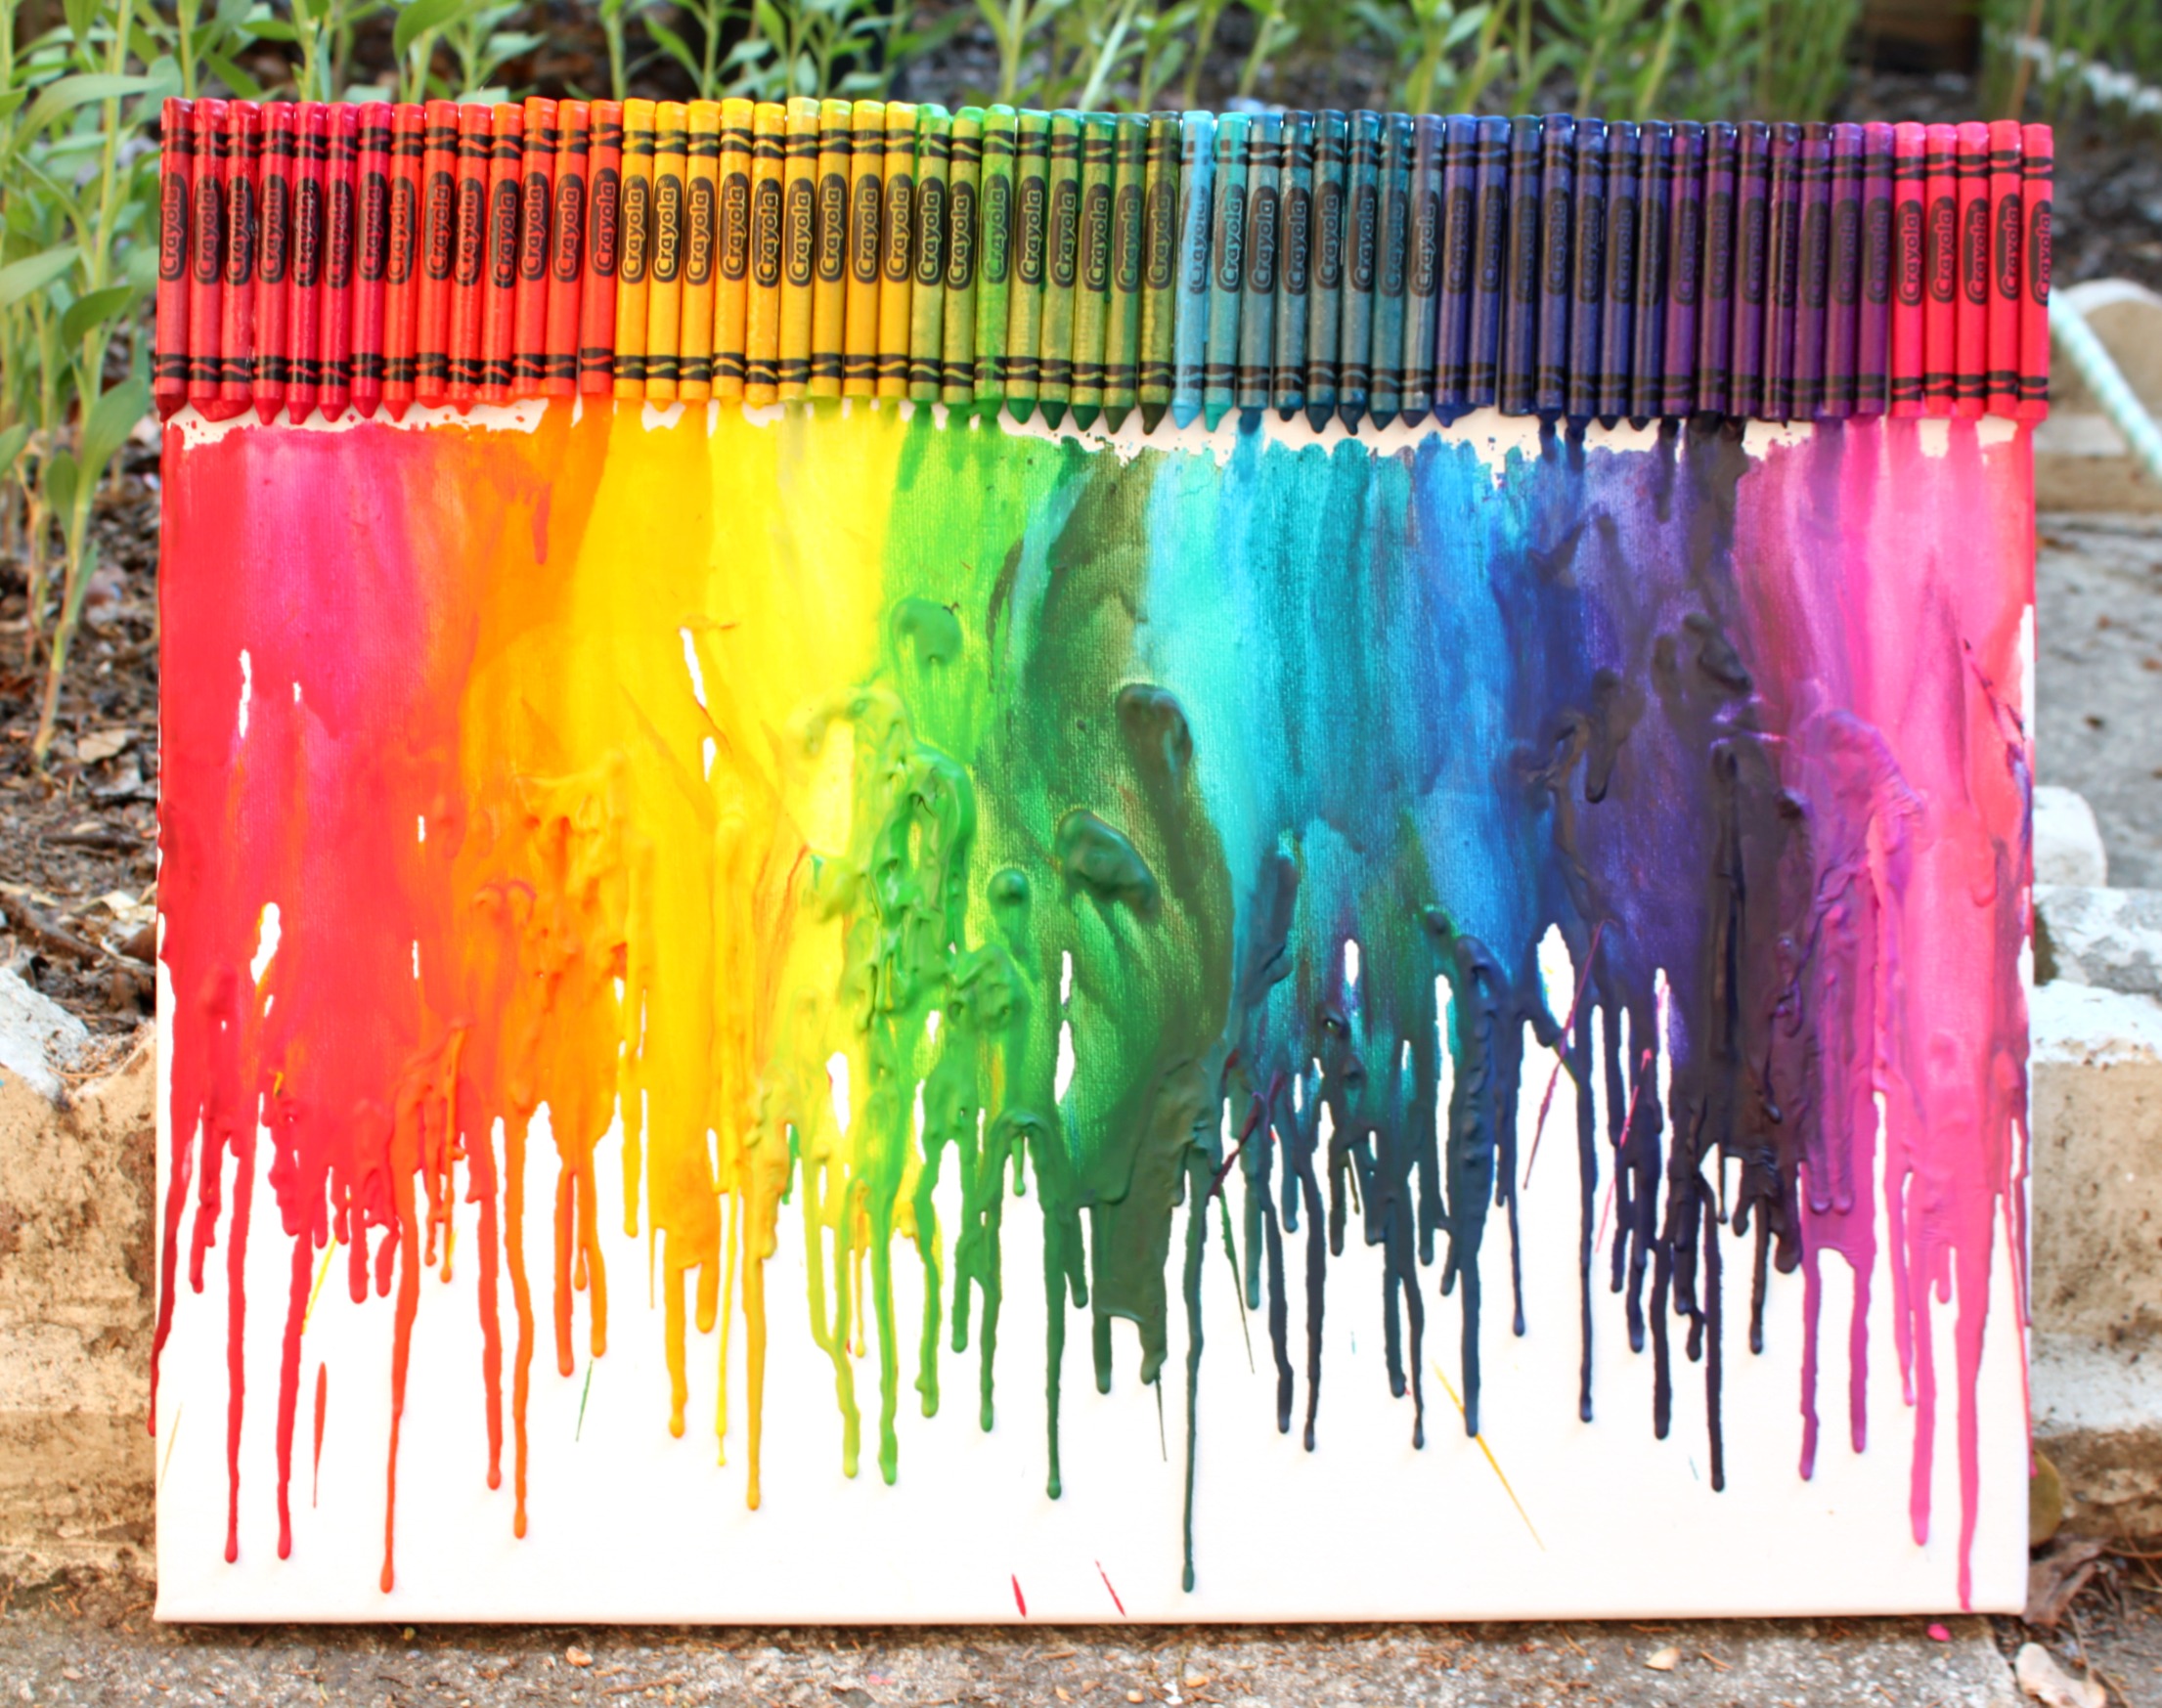 How To Make Rainbow Melted Crayon Art